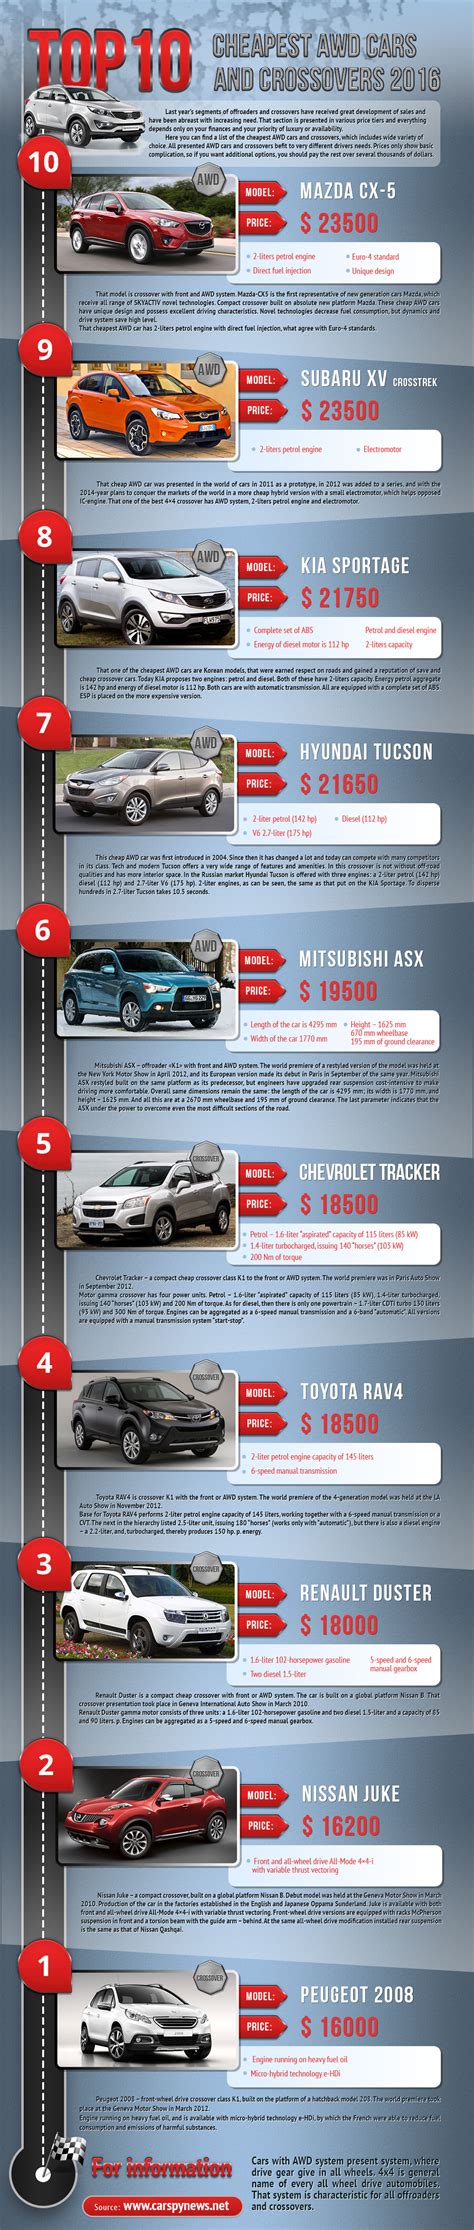 Cheap Awd Cars Top 10 Of The Cheapest Awd Vehicles And Suvs In The